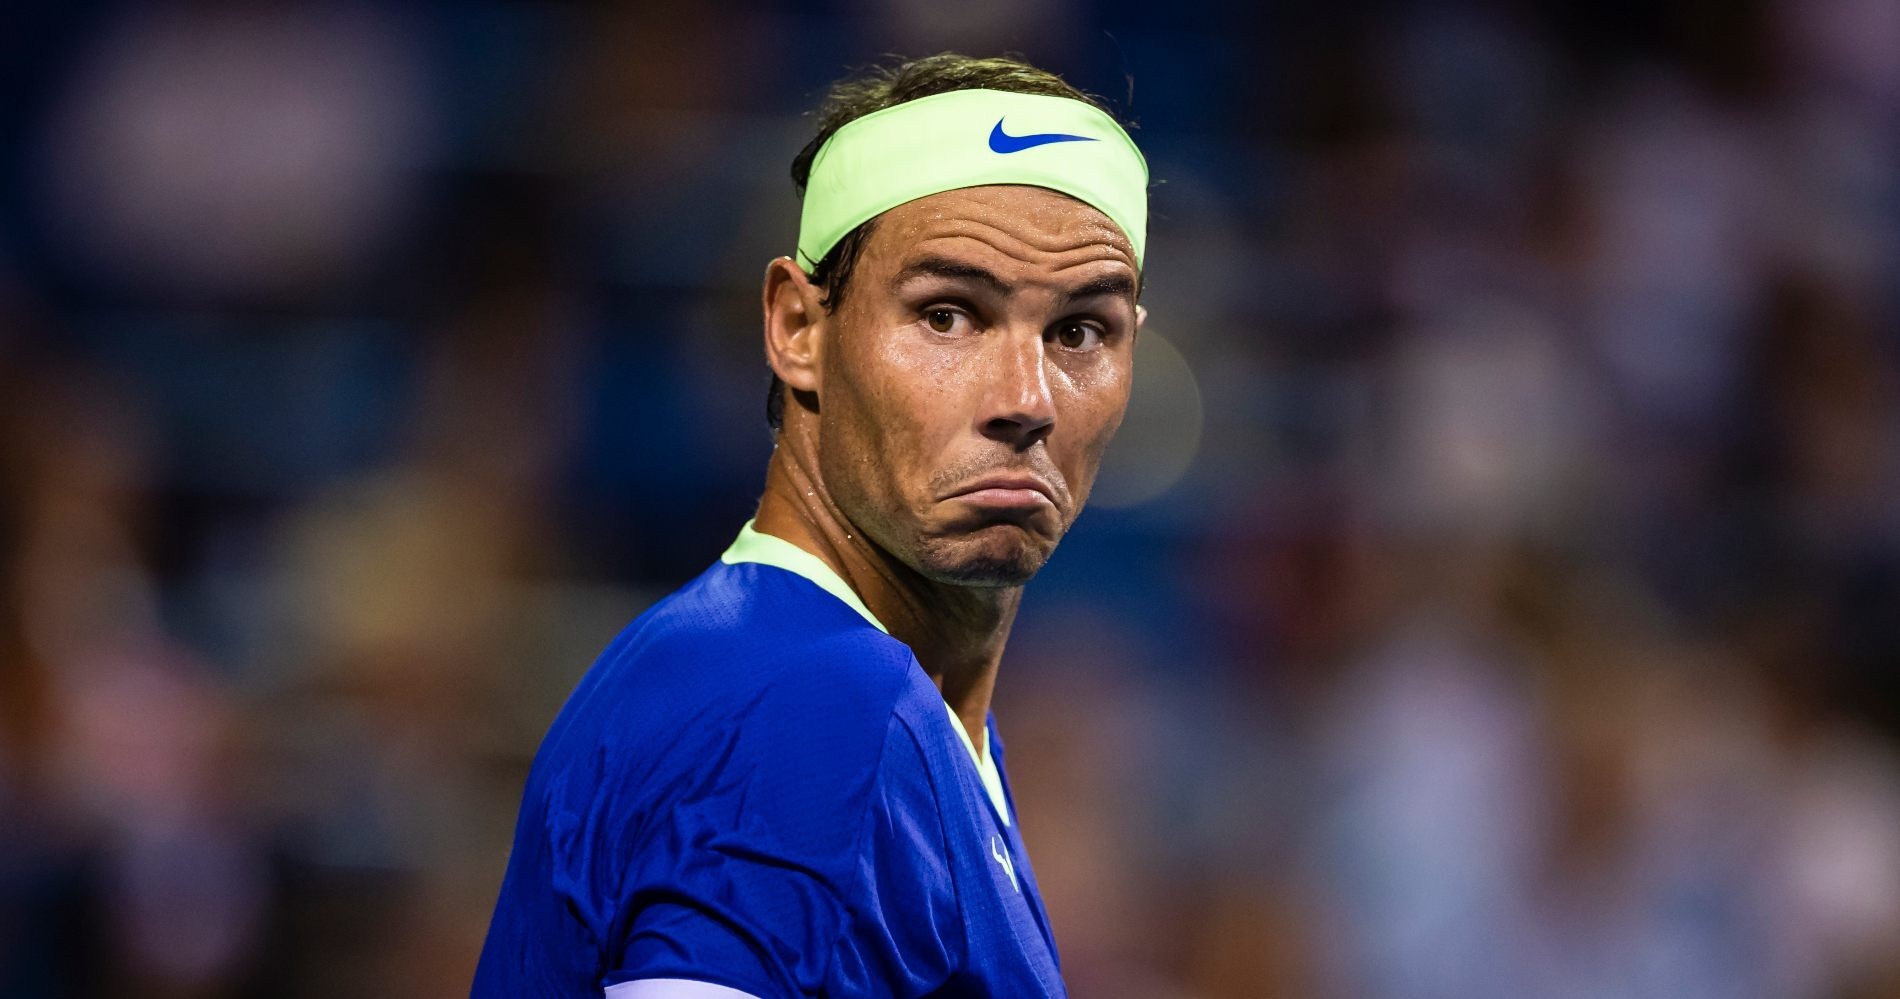 Nadal out of Toronto with ongoing foot injury Tennis Majors